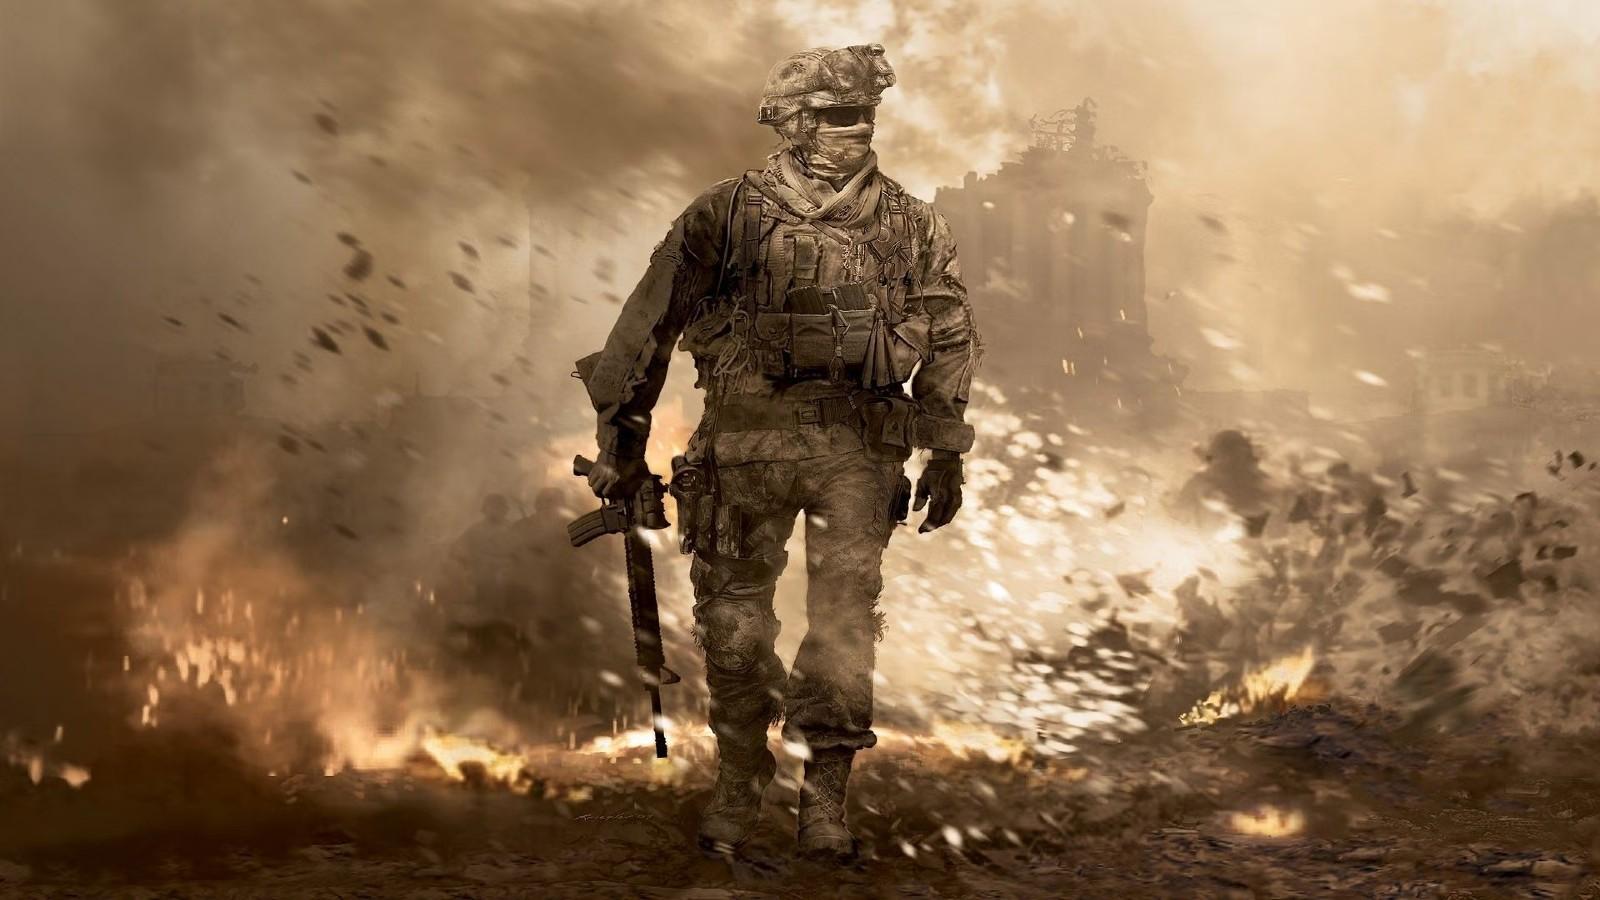 COD players dust off Xbox 360s to celebrate “sudden” Modern